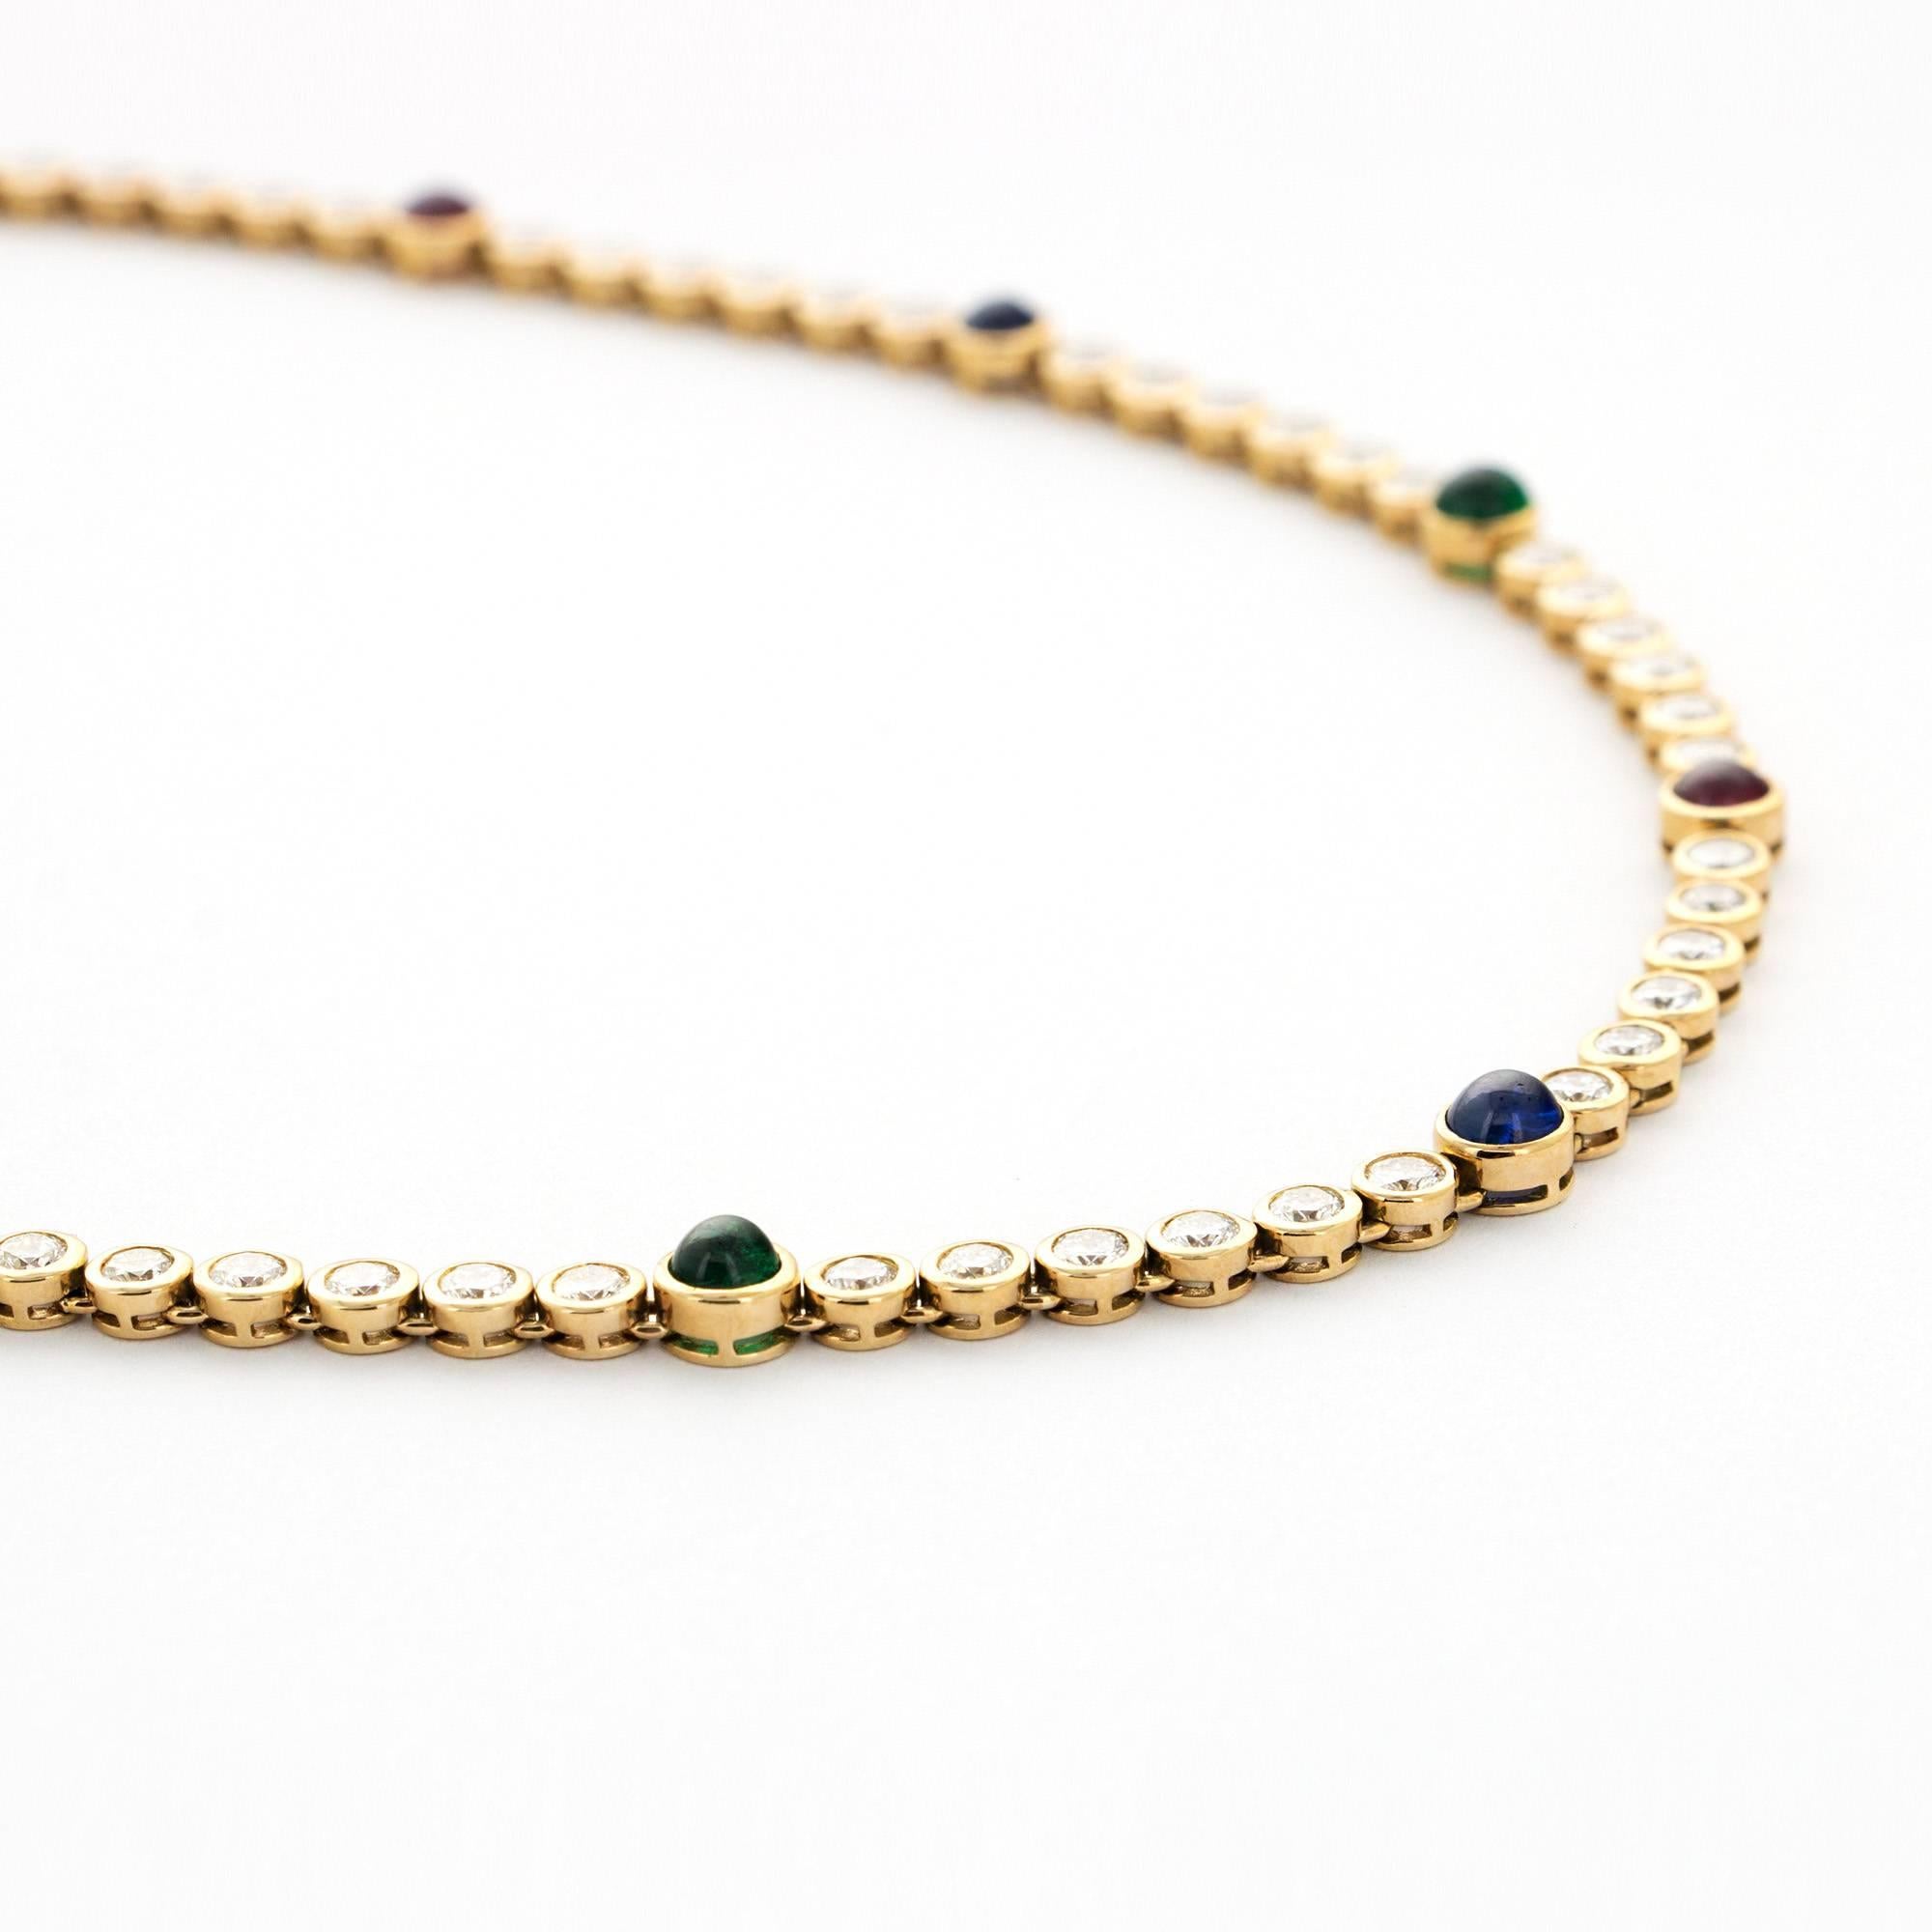 A 1980's Straight-Line Diamond Necklace with Cabochon Rubies, Emeralds and Sapphires in 18k Yellow Gold.  Signed 